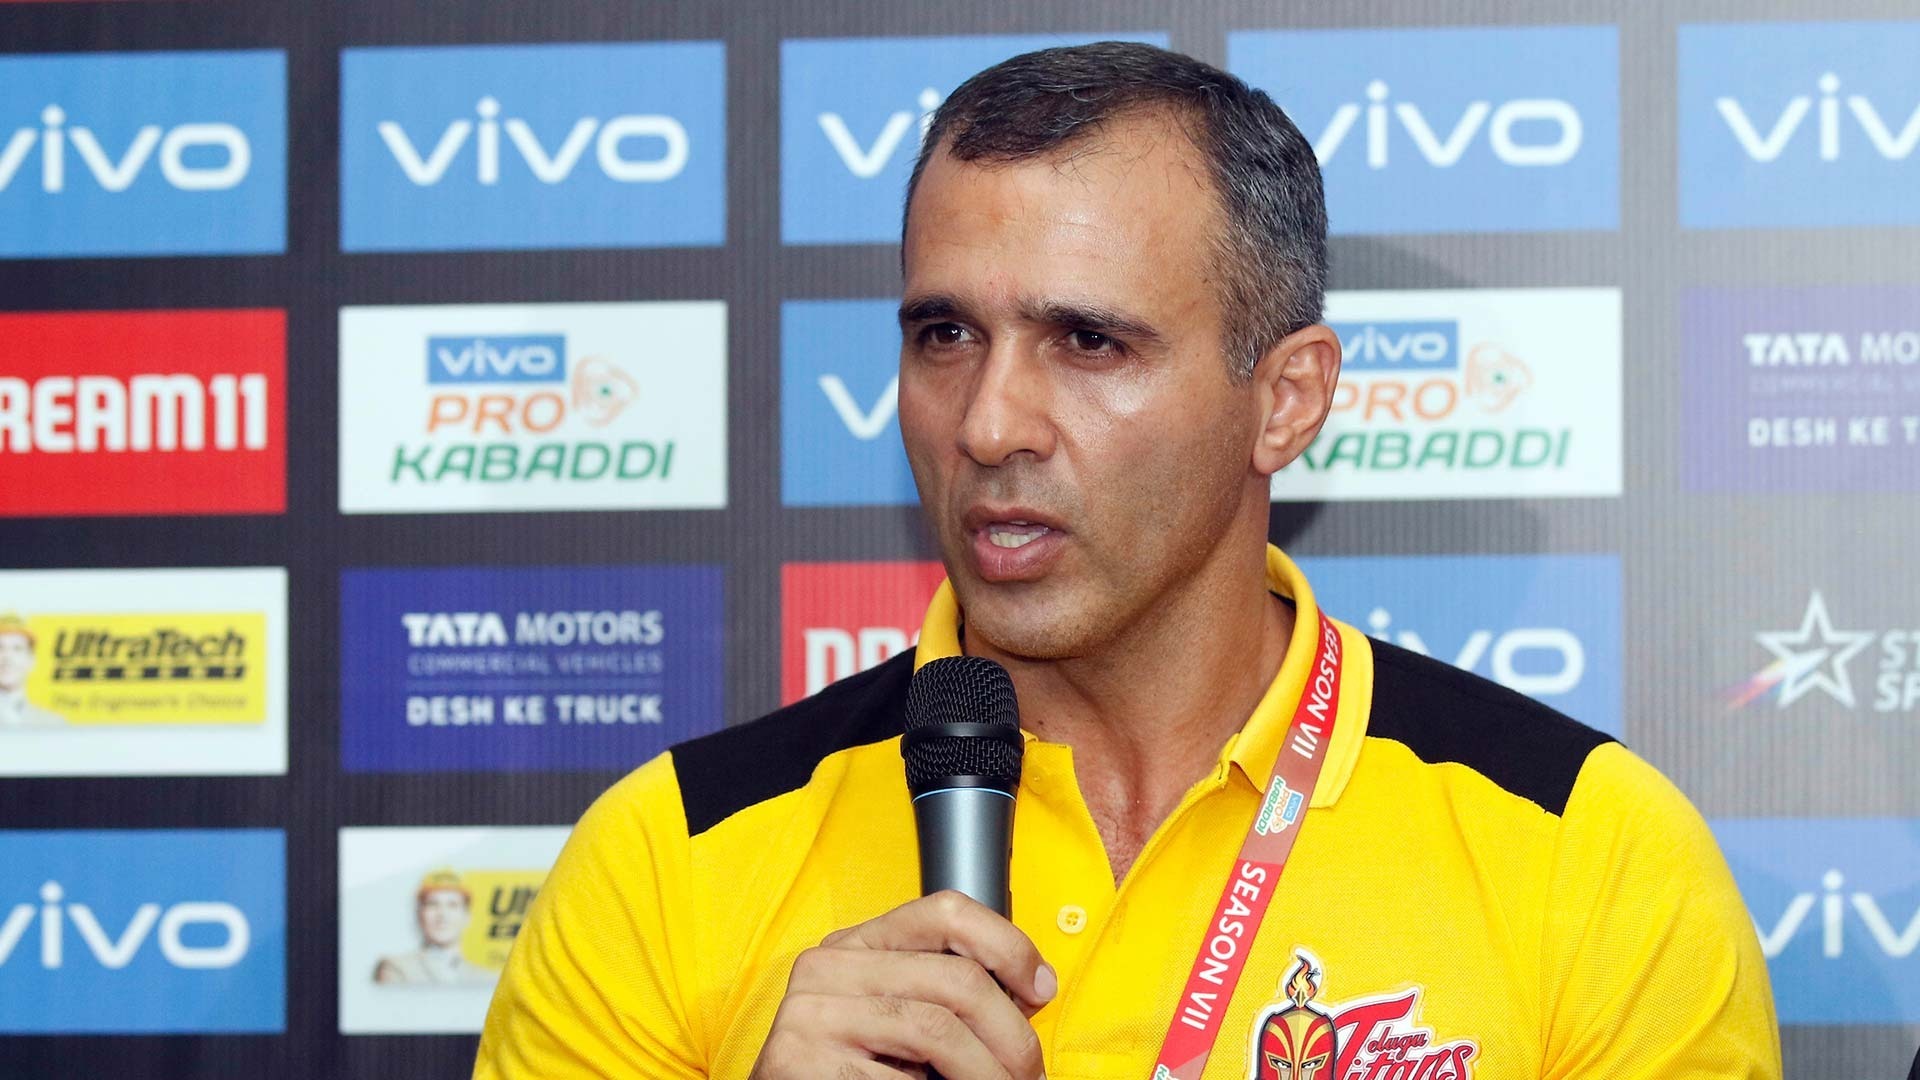 PKL 2019 | Our focus is on being the best team, says Gholamreza Mazandarani